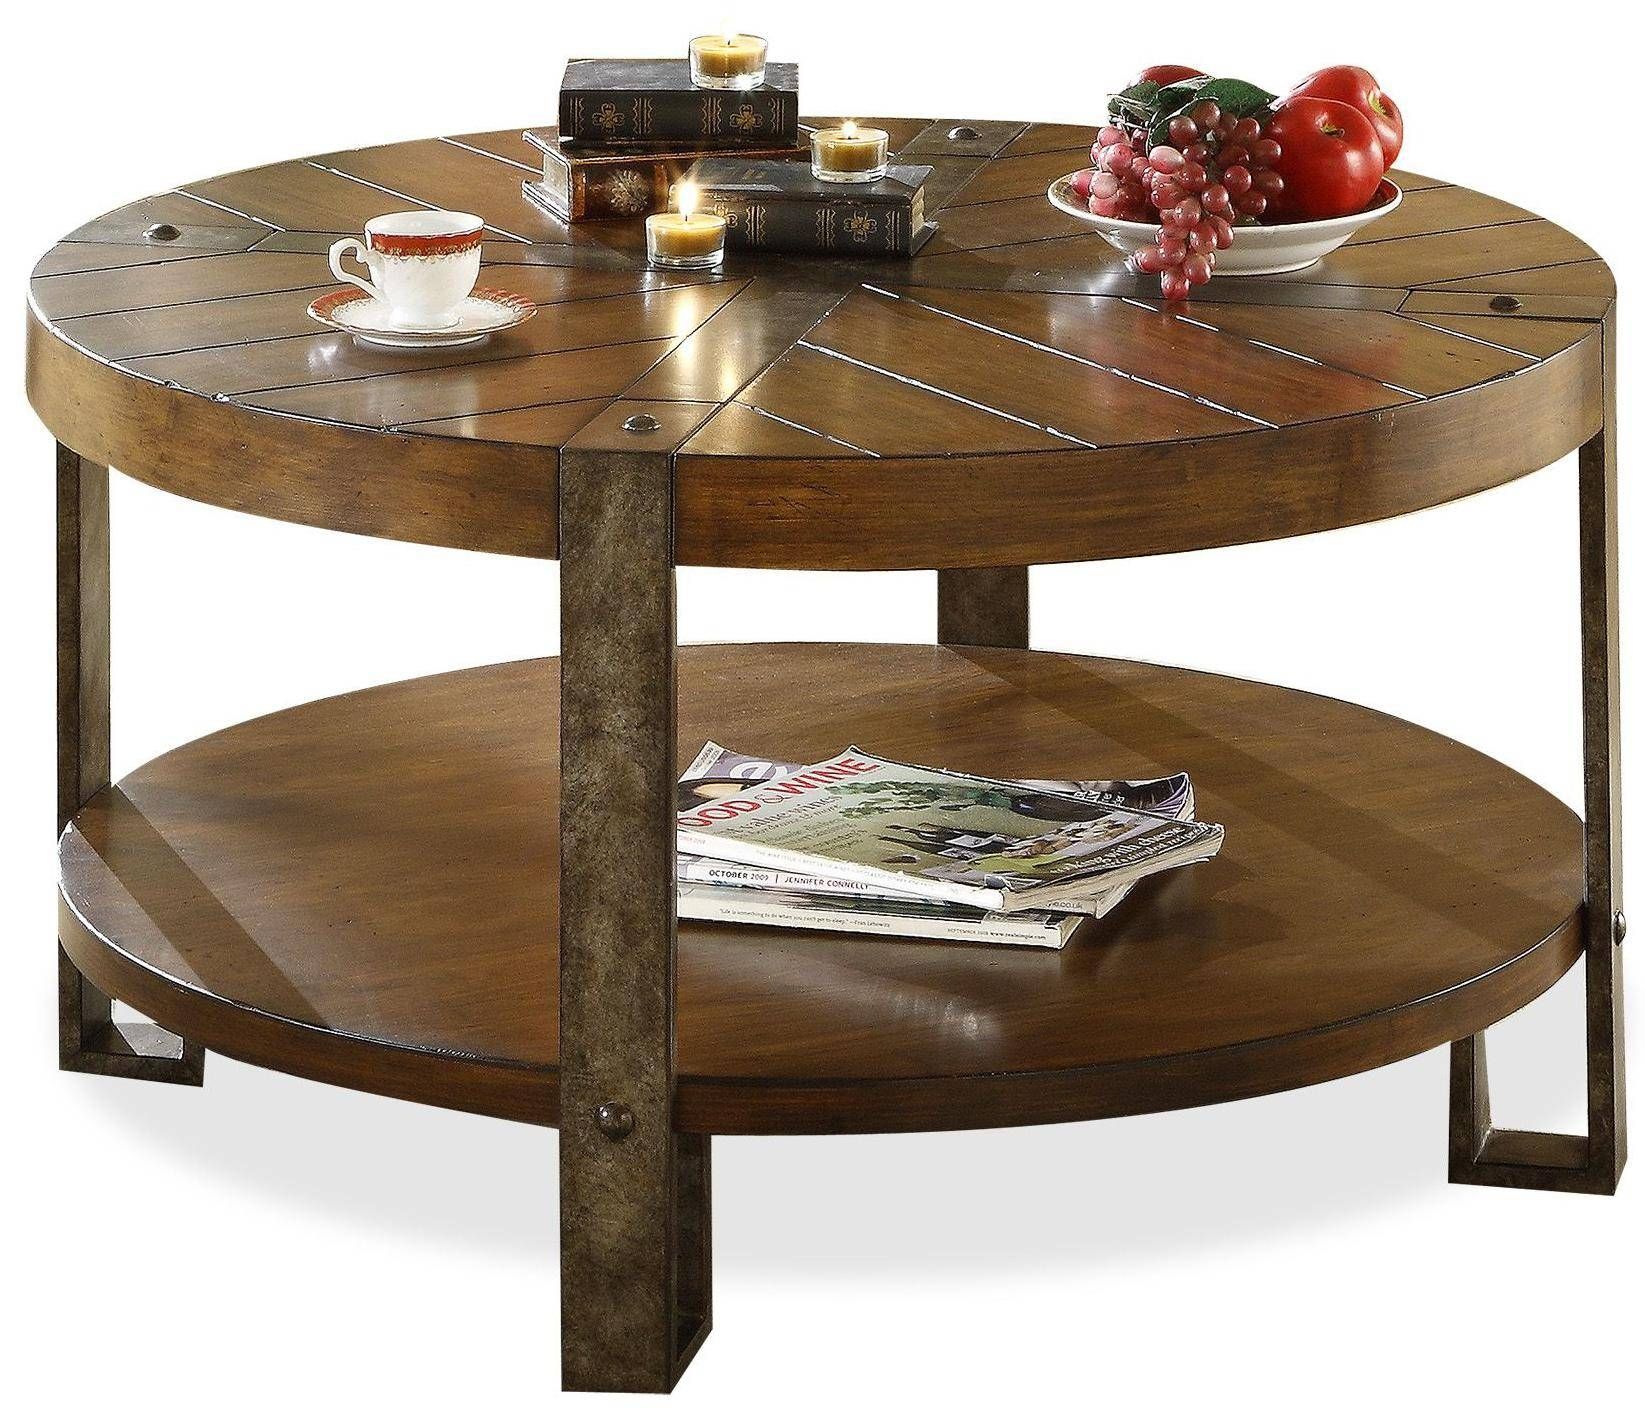 Coffee Table: Outstanding Round Storage Coffee Table Designs Small Inside Dark Wood Coffee Table Storages (View 30 of 30)